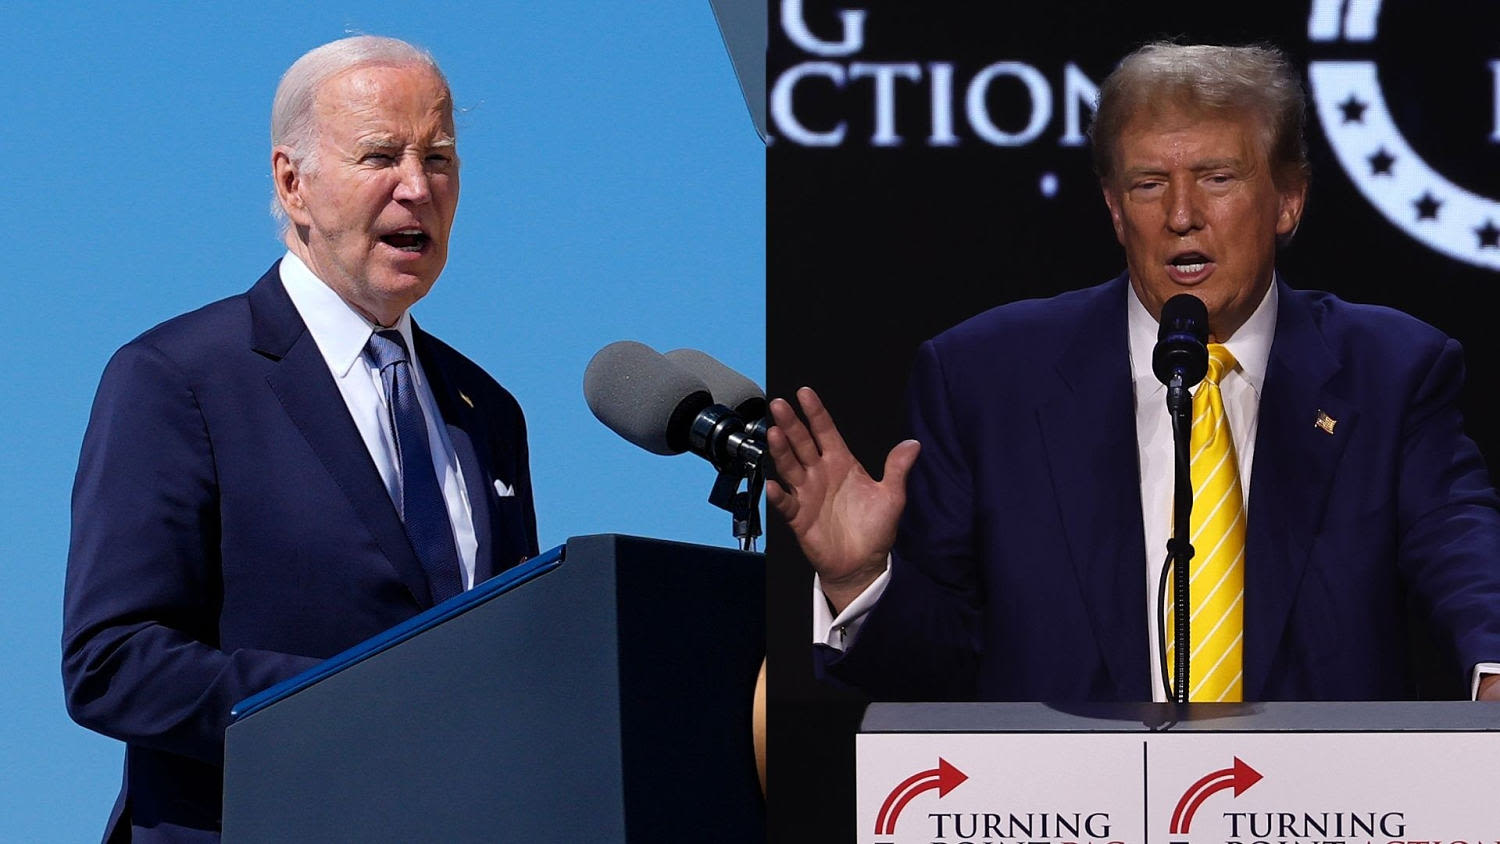 ‘Couldn’t have drawn a contrast more clearly’: Biden and Trump’s differences on D-Day anniversary